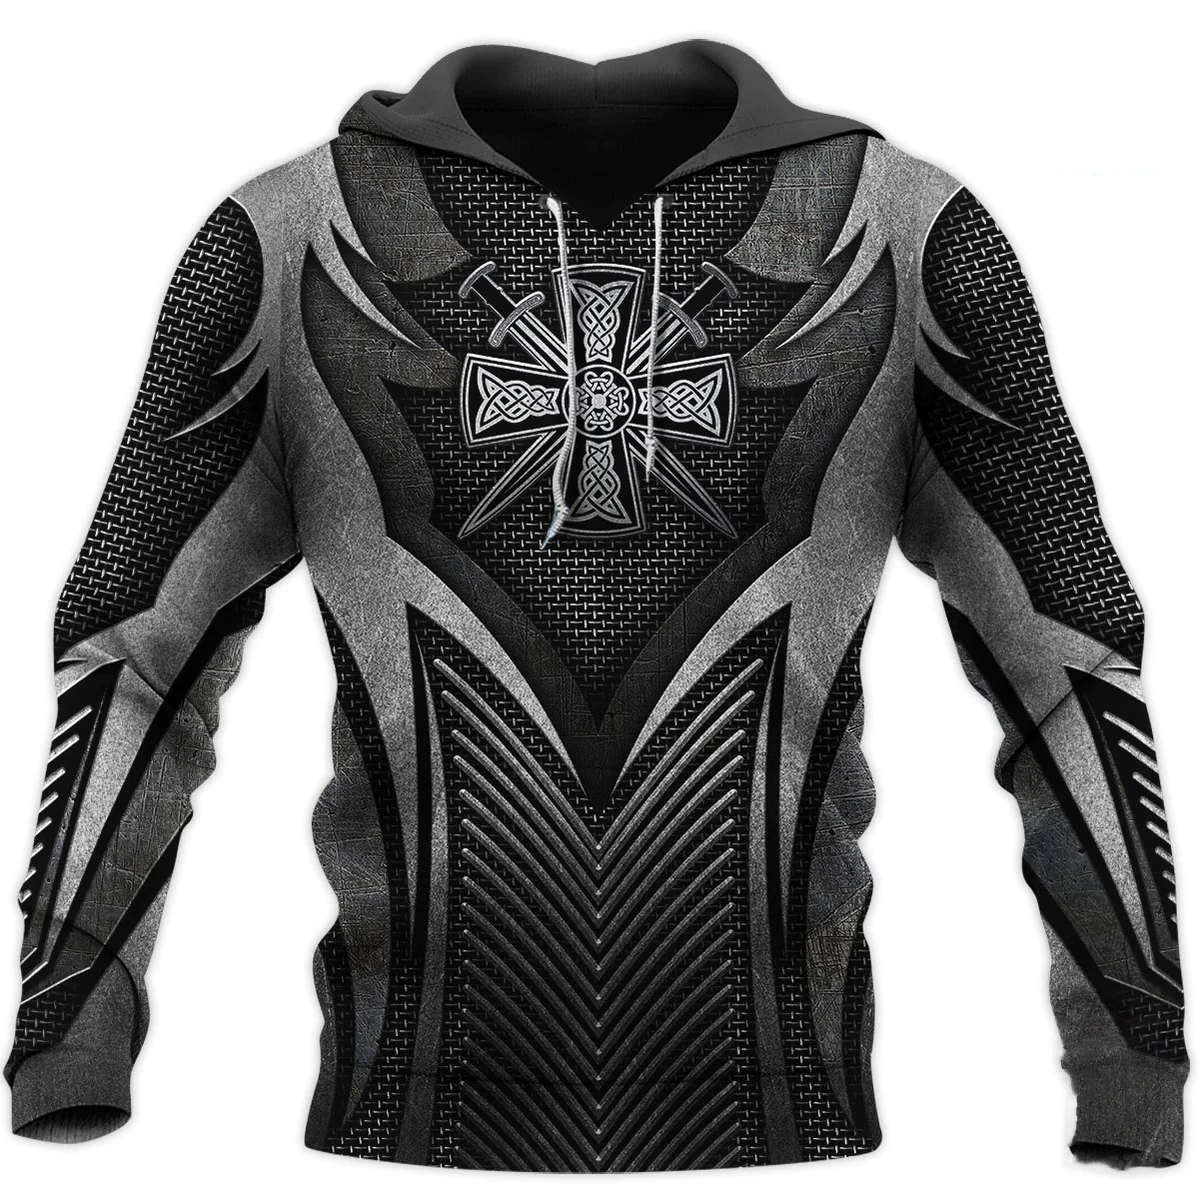 Irish Armor Warrior Chainmail Shirts/ 3D All Over Printed St. Patrick''s Day Shirt/ Armor Shirt